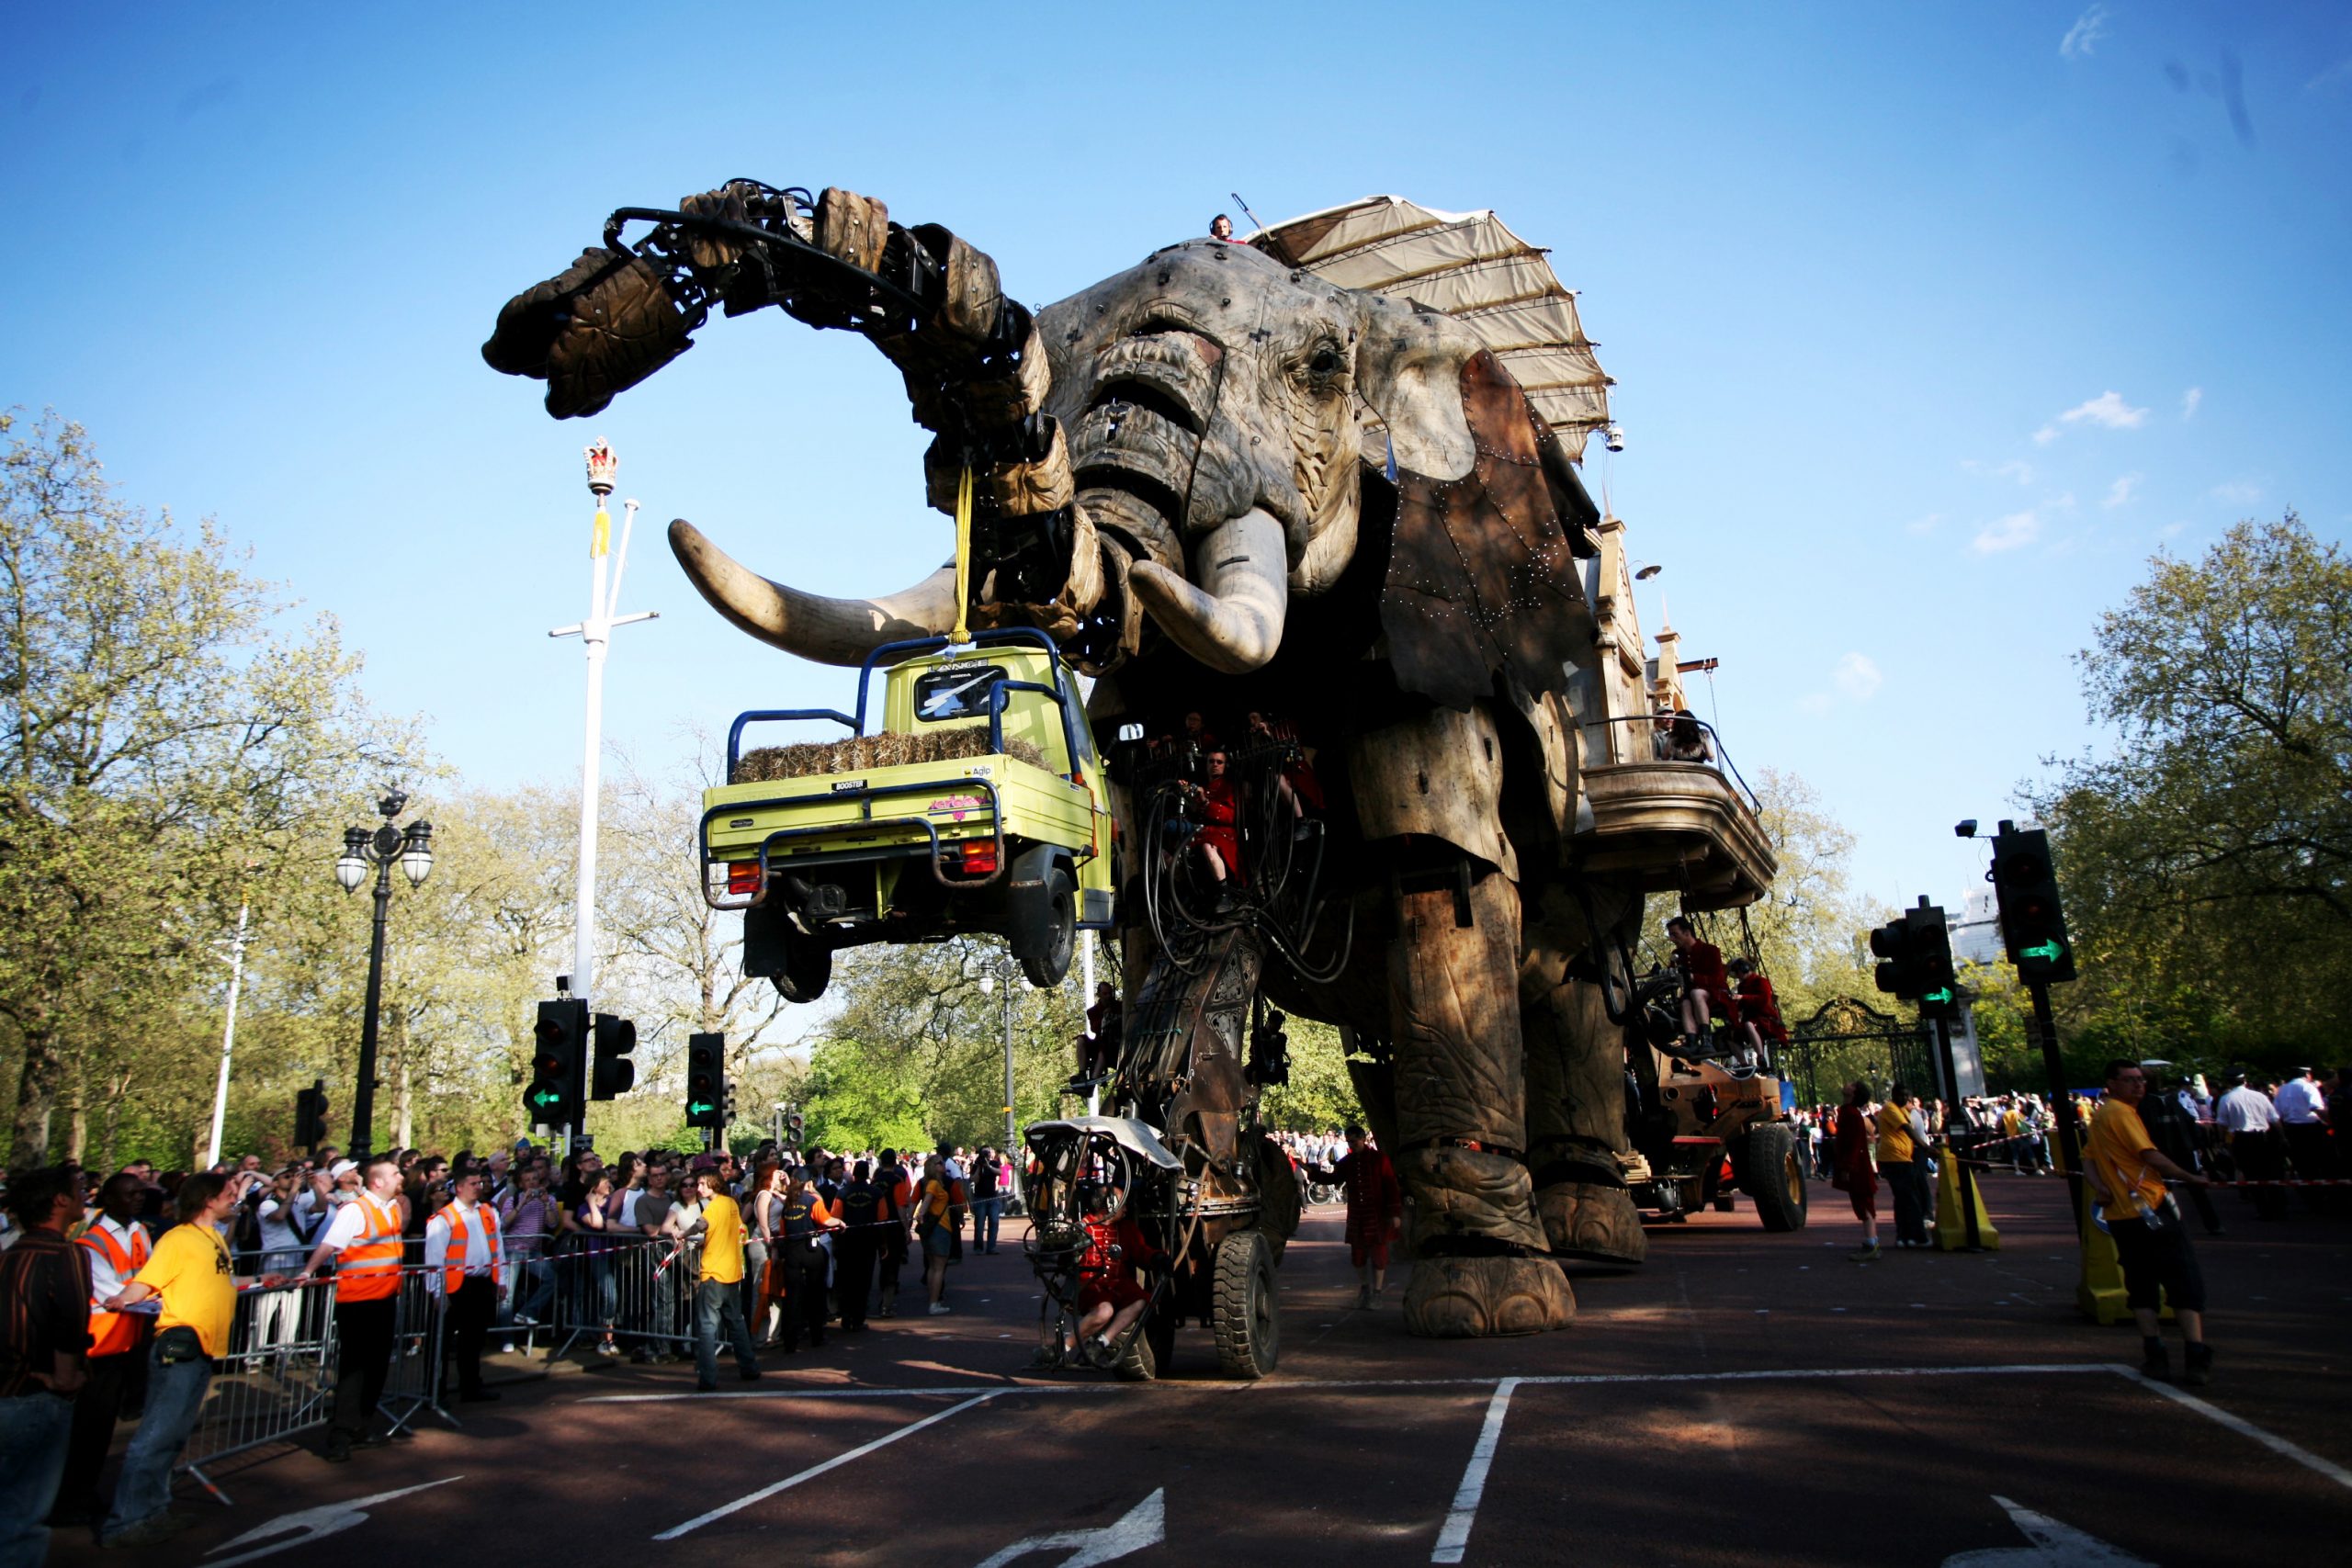 Giant puppet The Sultan's Elephant picking up a yellow pick up truck with its trunk with a crowd around it.